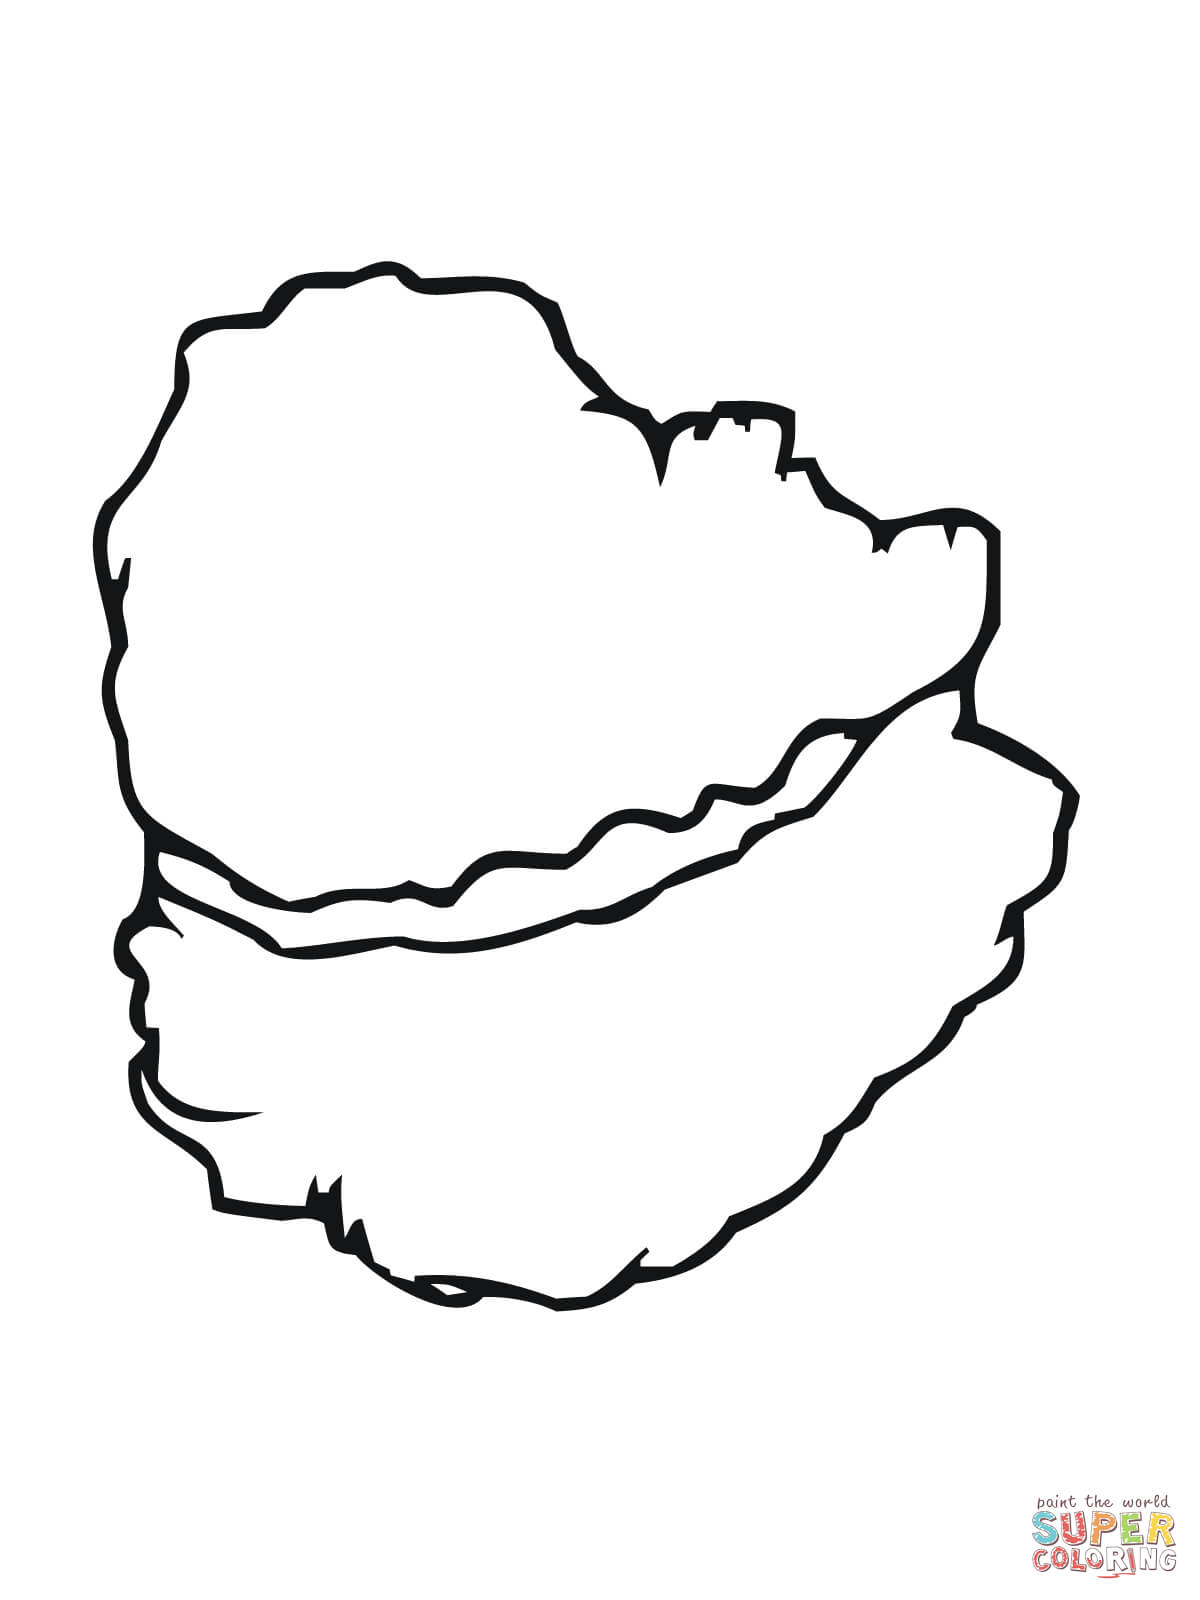 Oyster shell coloring page free printable coloring pages